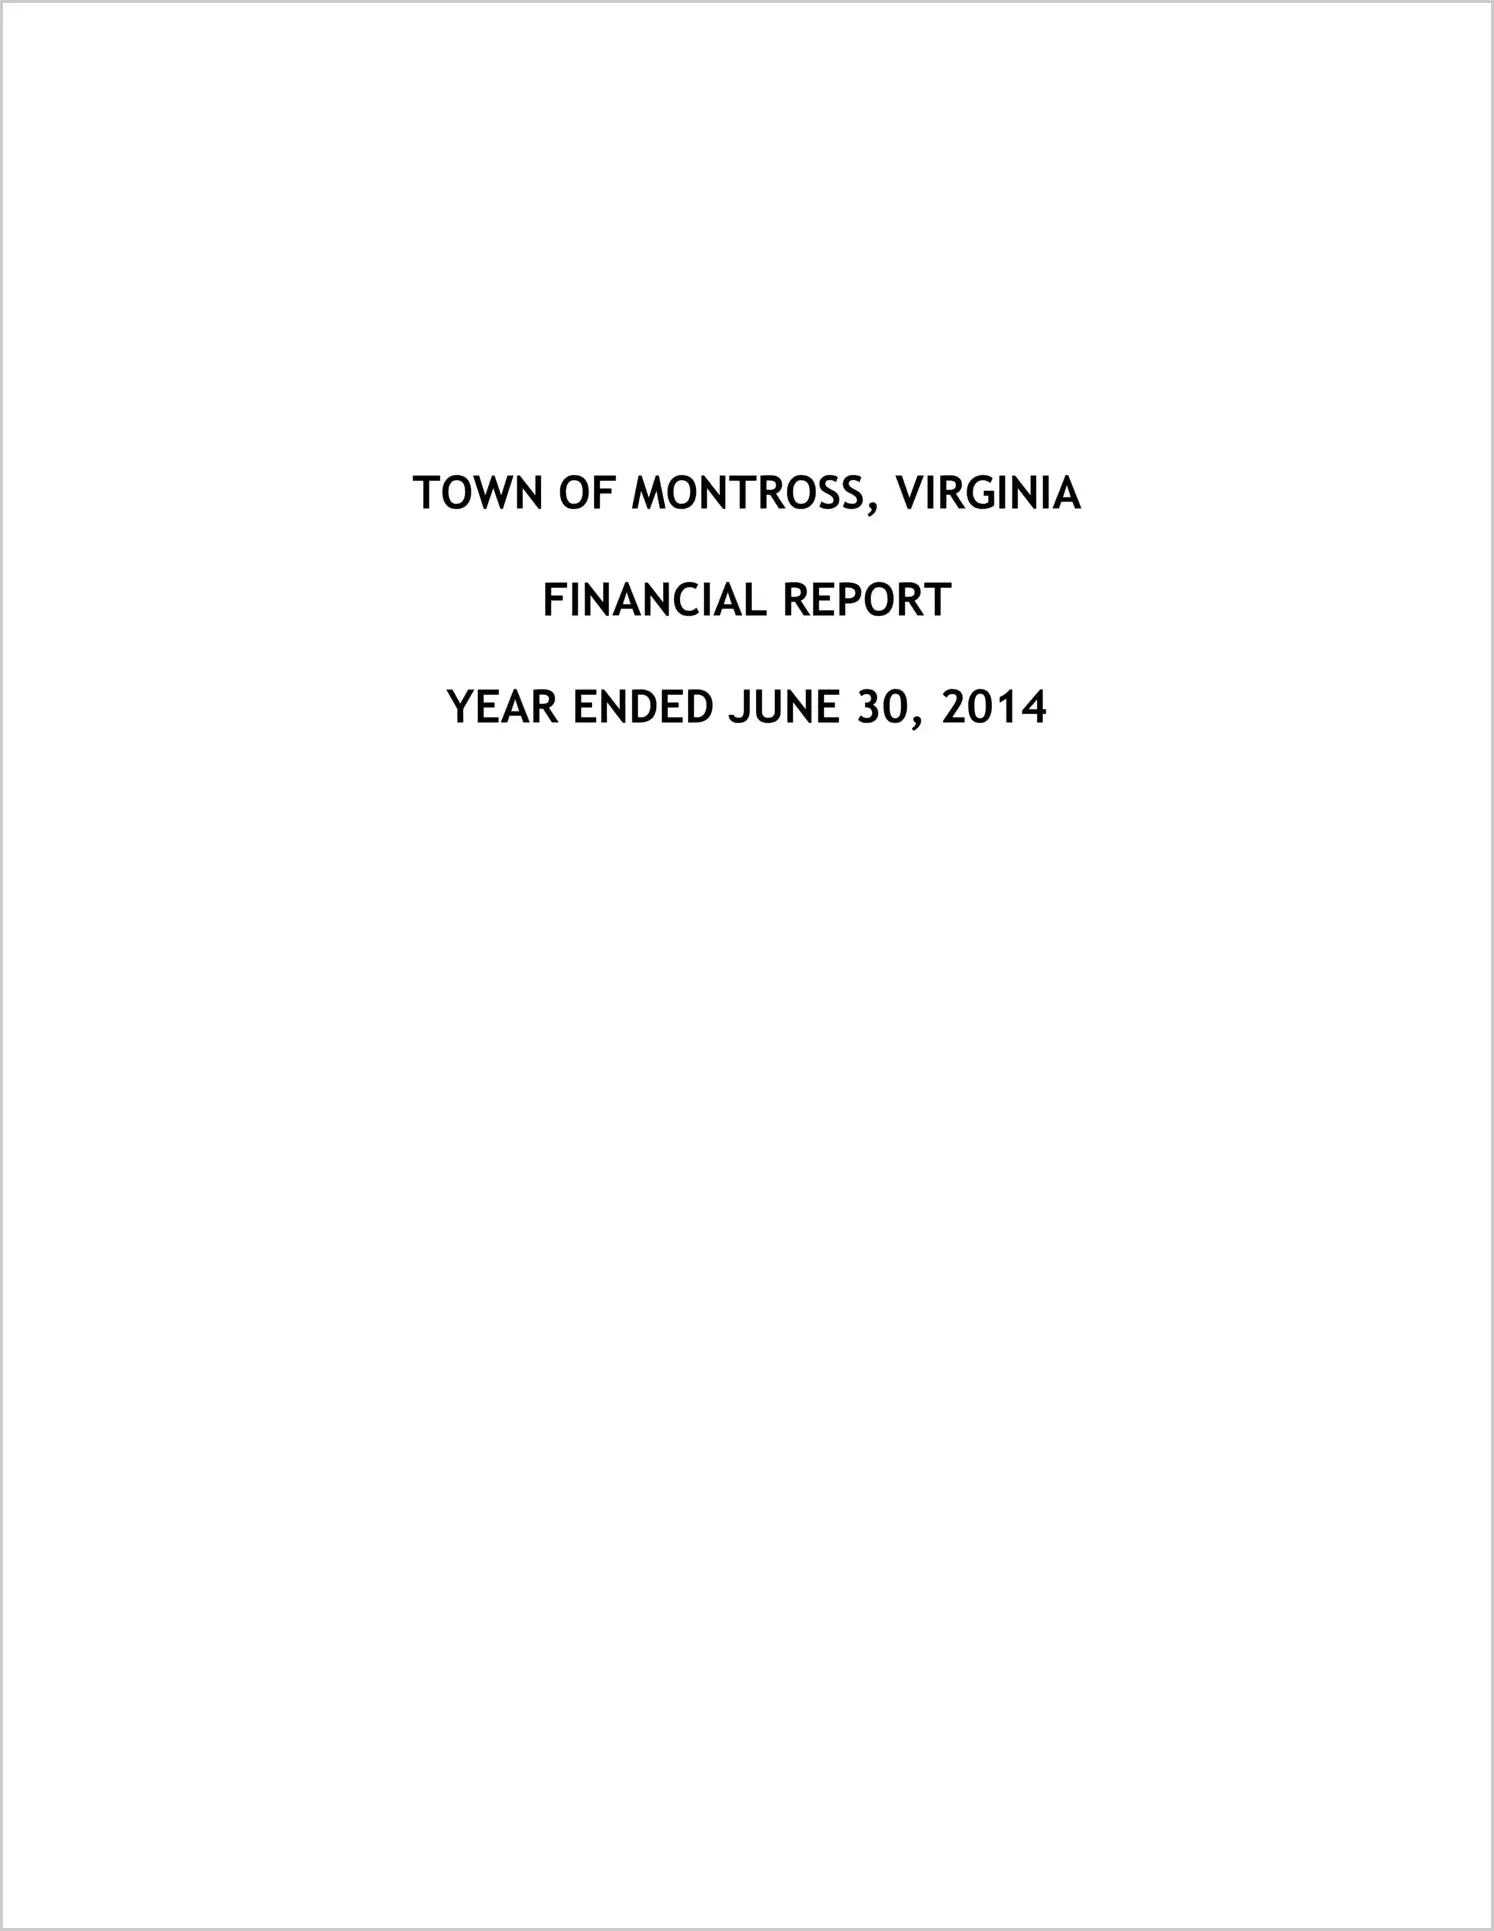 2014 Annual Financial Report for Town of Montross